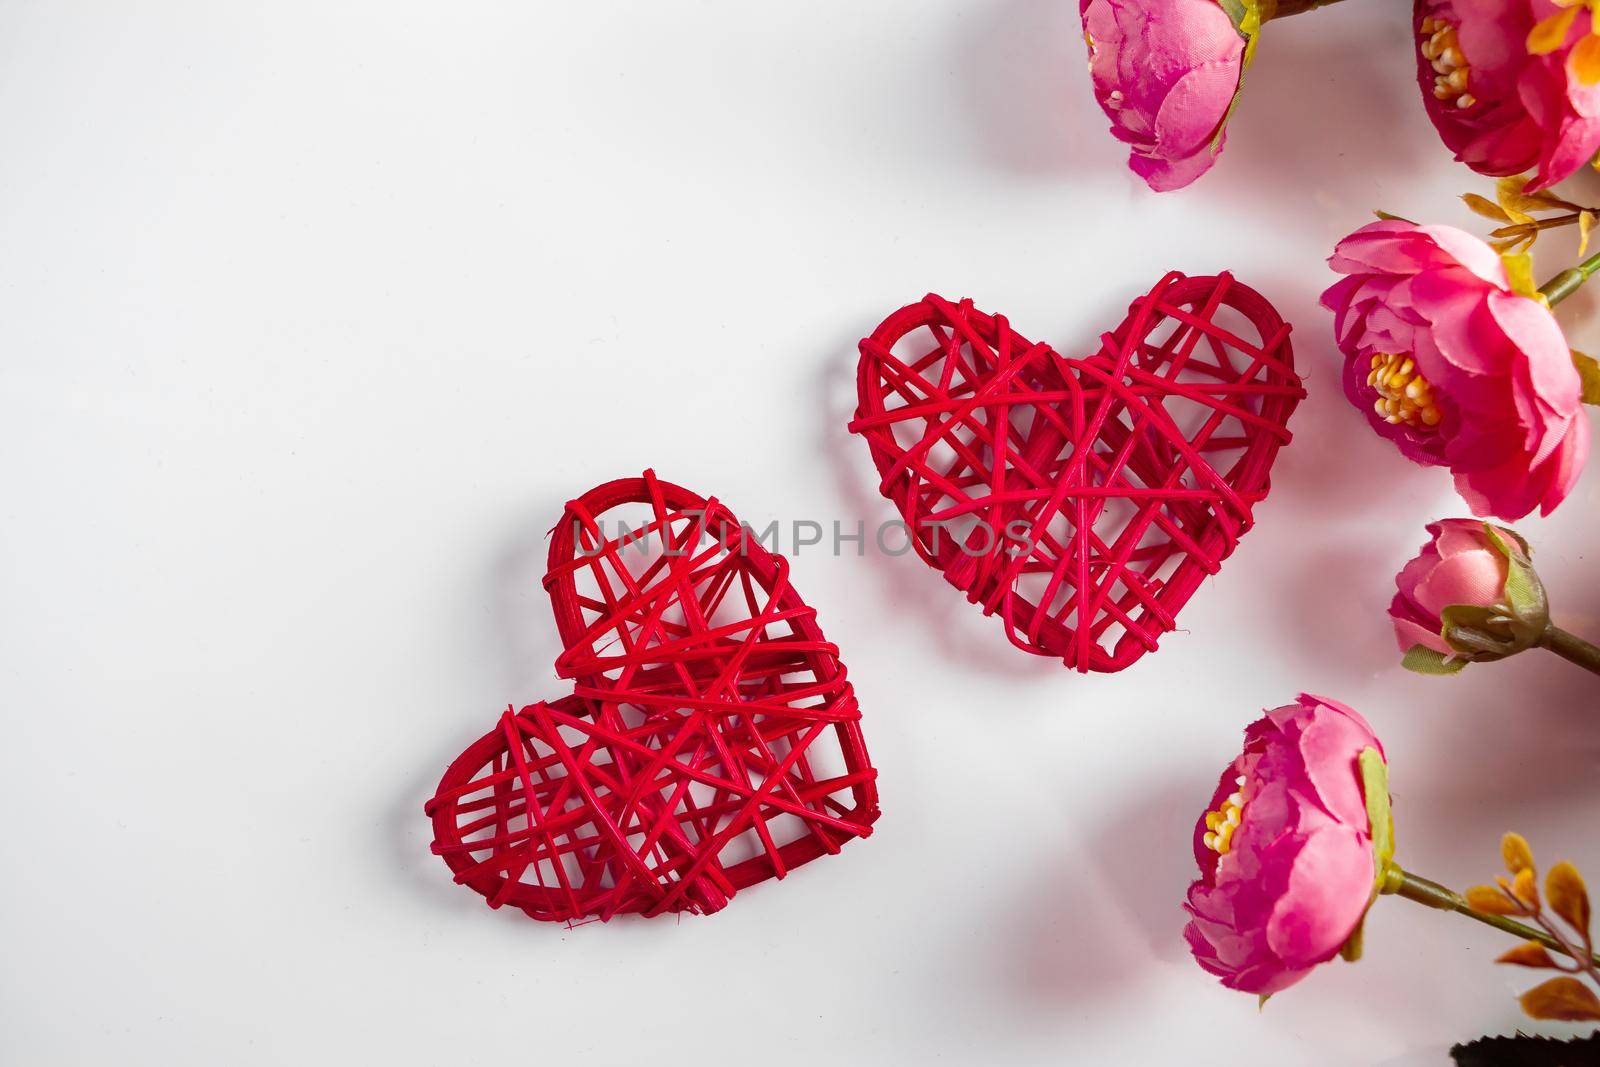 Flowers and red hearts on a white background for Valentine's Day. Two red hearts and delicate pink flowers on a white background